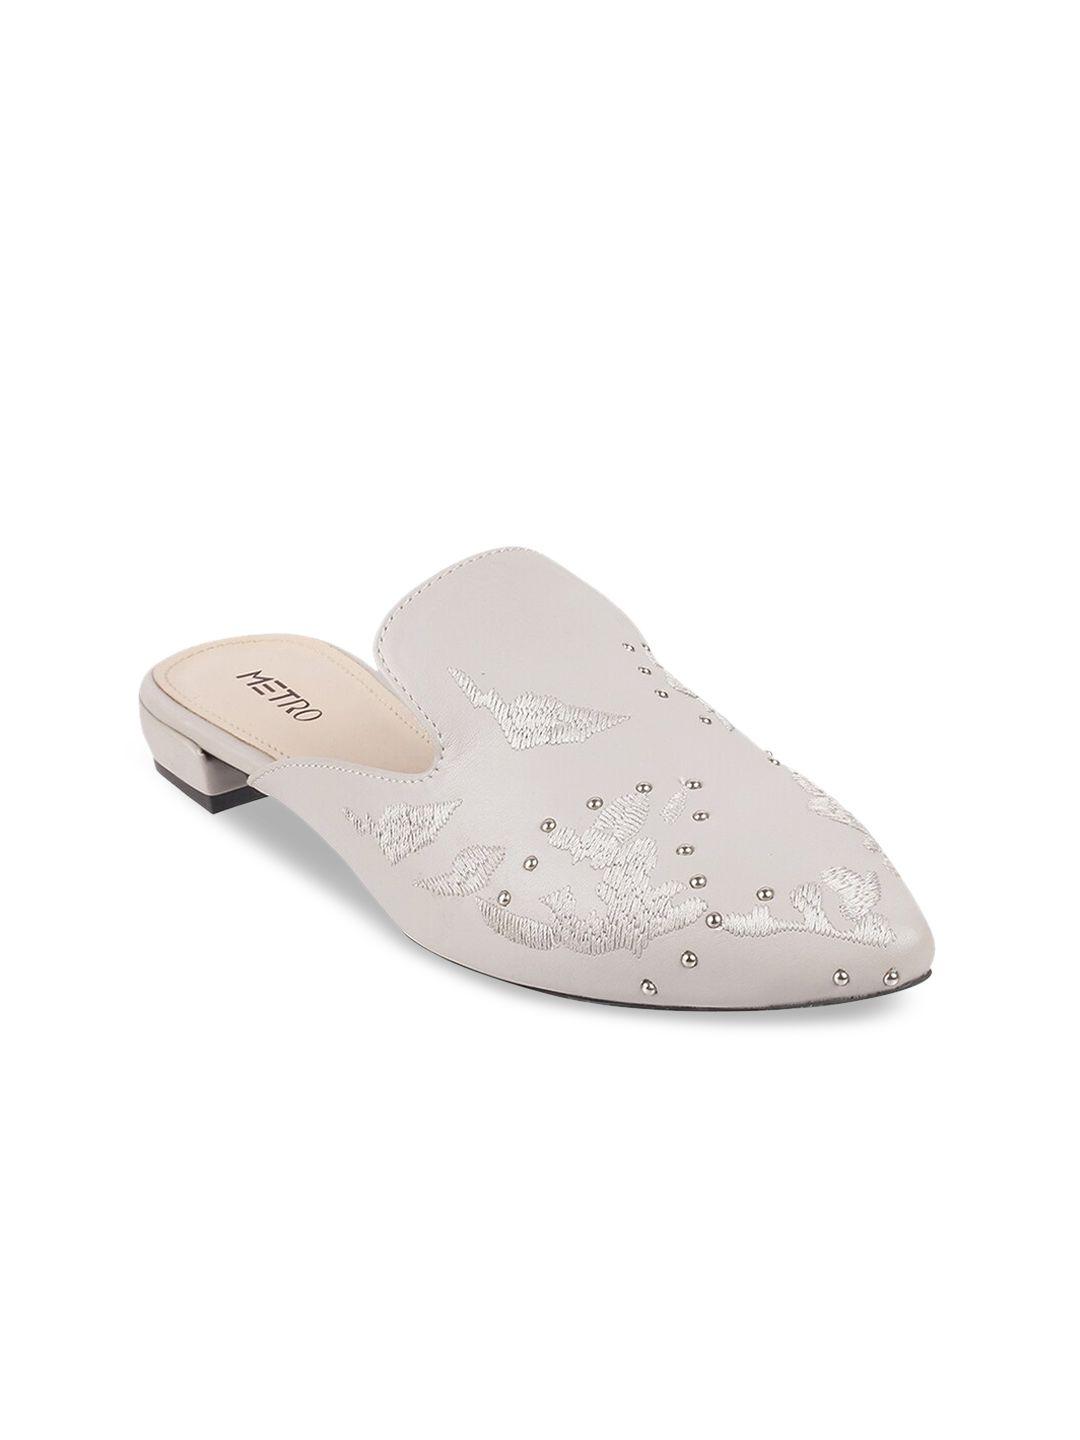 metro women grey embroidered mules